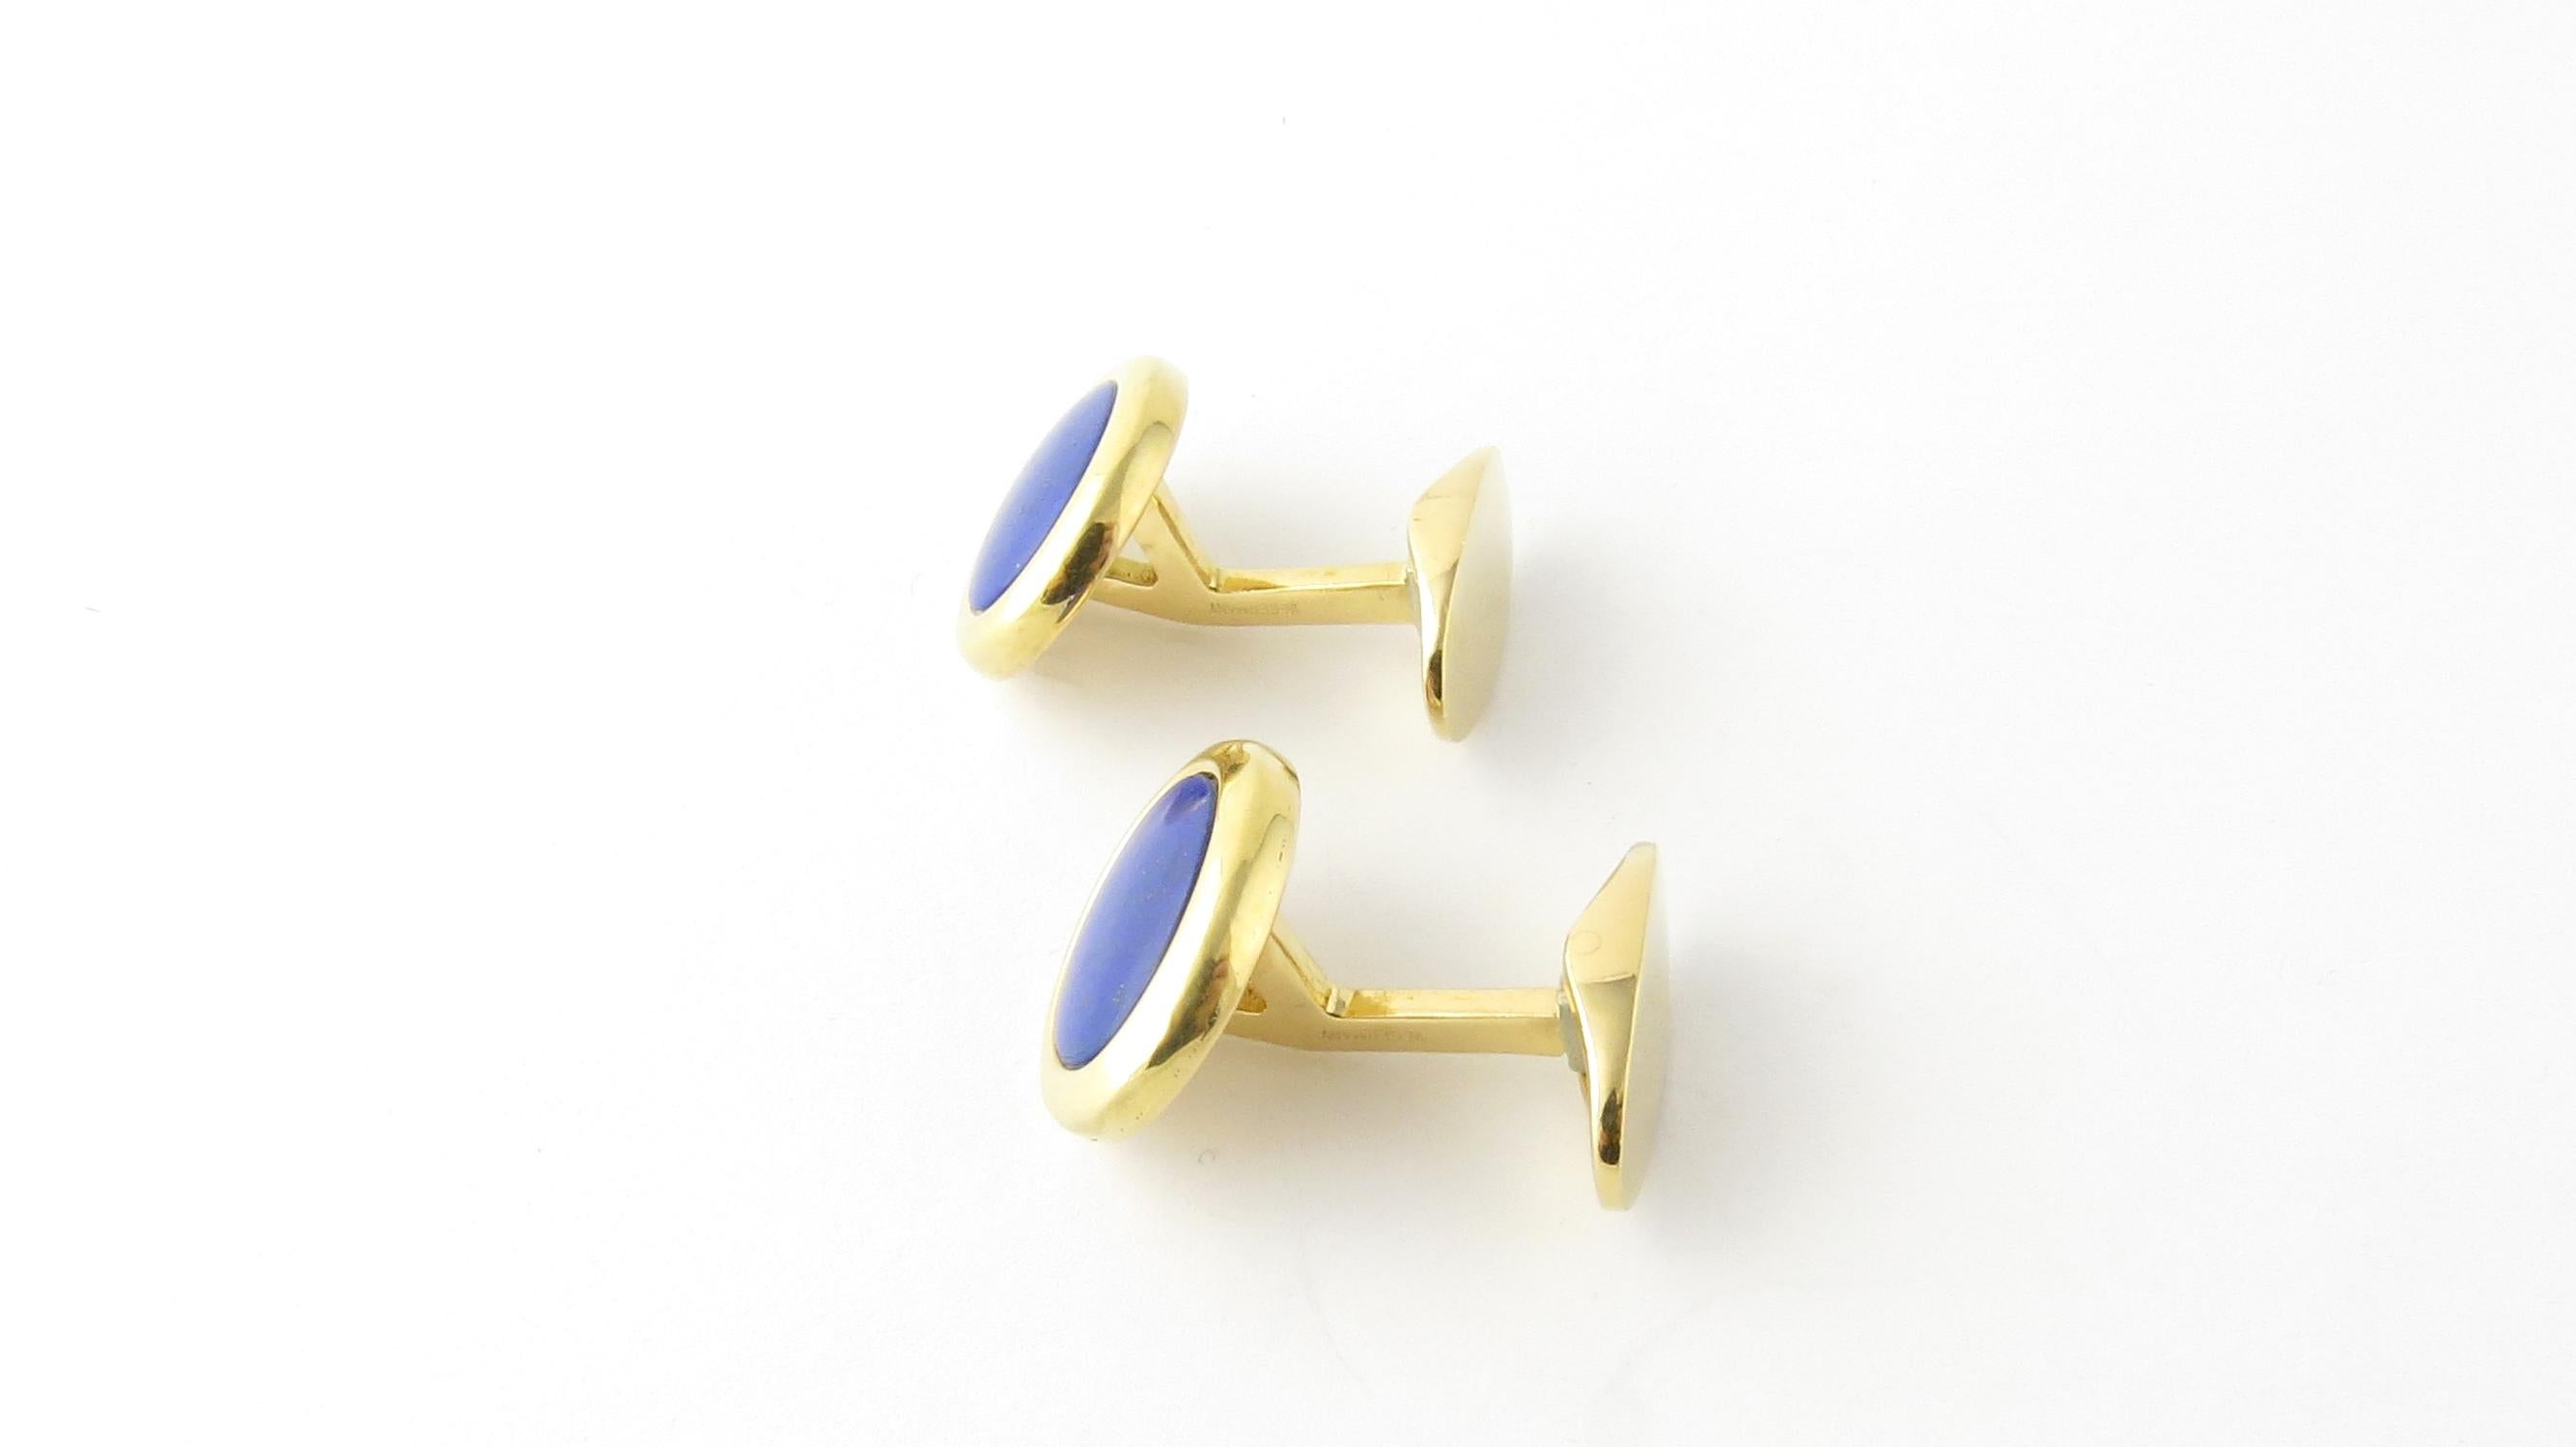 Tiffany & Co. West Germany 18K Yellow Gold Blue Lapis Cufflinks

These authentic Tiffany & Co. cufflinks are approx. 23 mm in length and 17 mm across at front

Stamped Tiffany & Co. 18K West Germany

10.9 dwt/ 17.0 g

Very good pre owned condition.